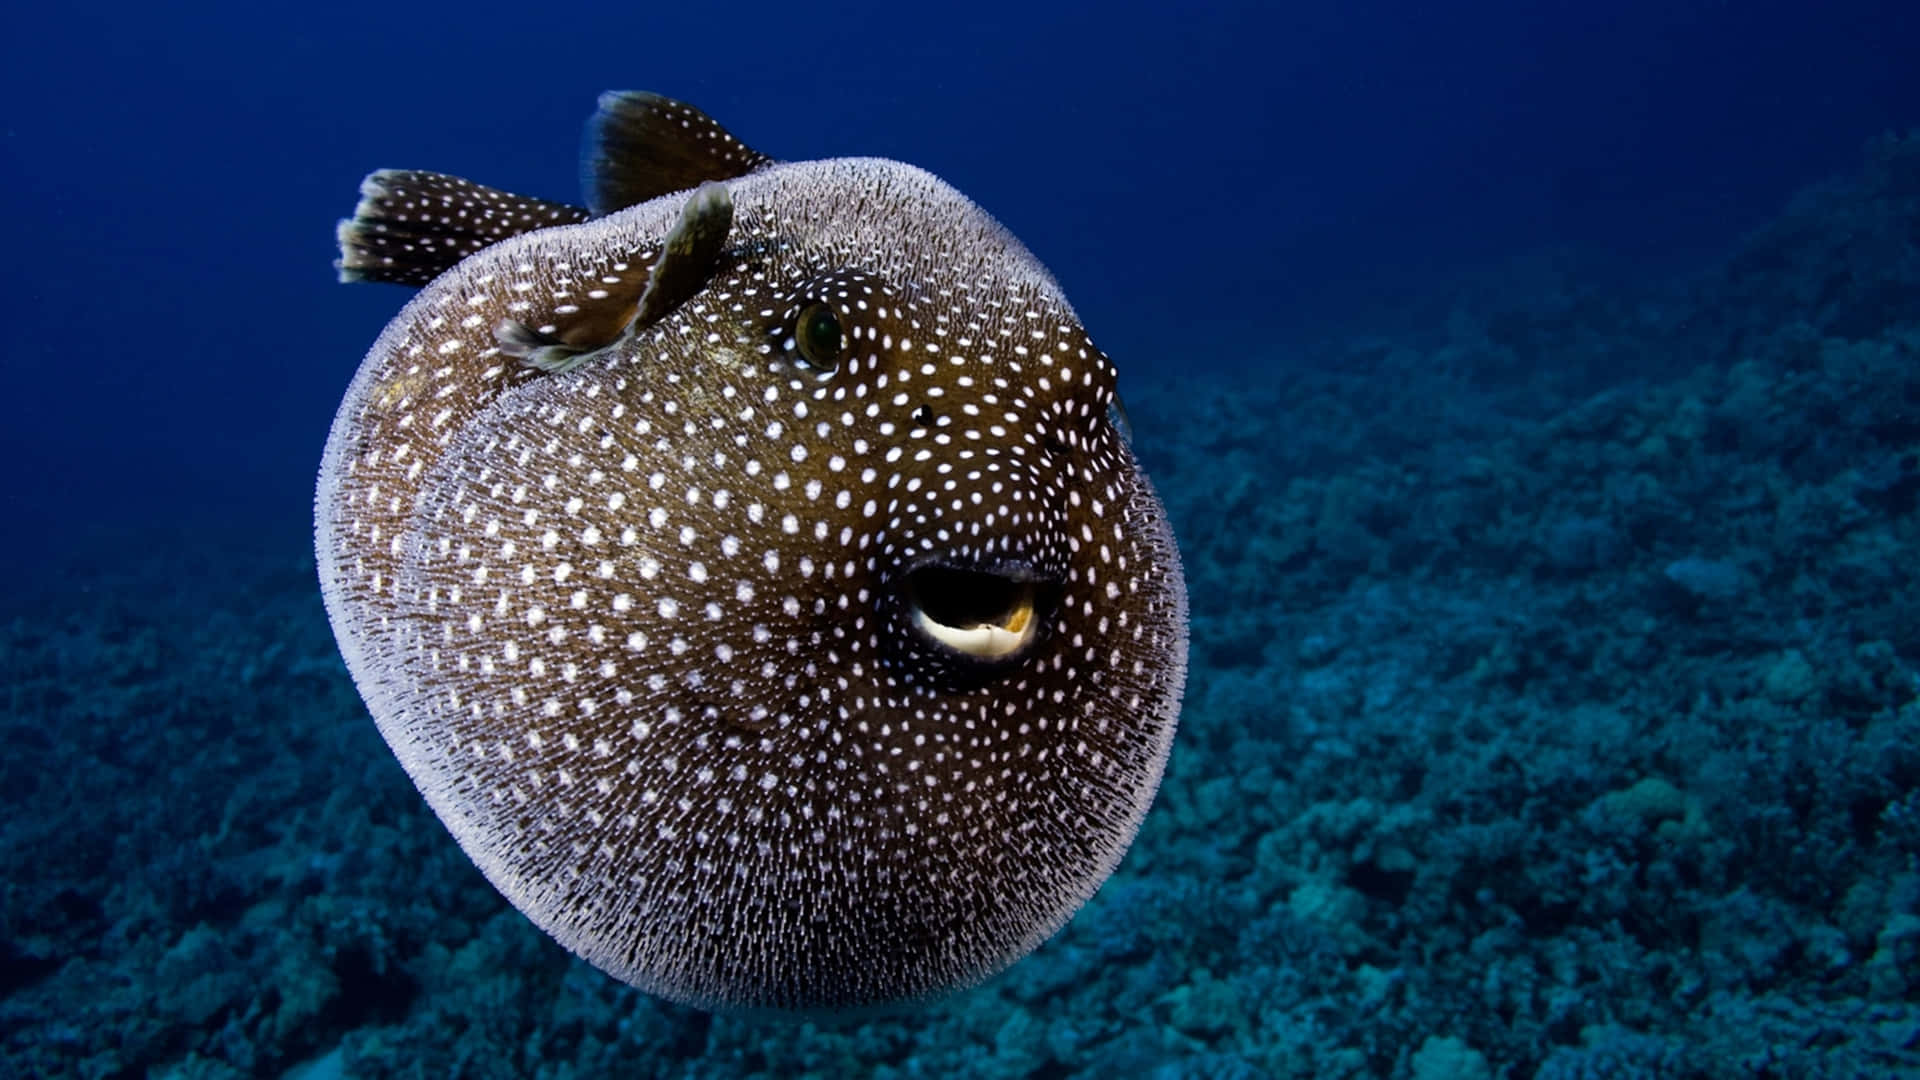 Inflated Spotted Pufferfish Underwater Wallpaper